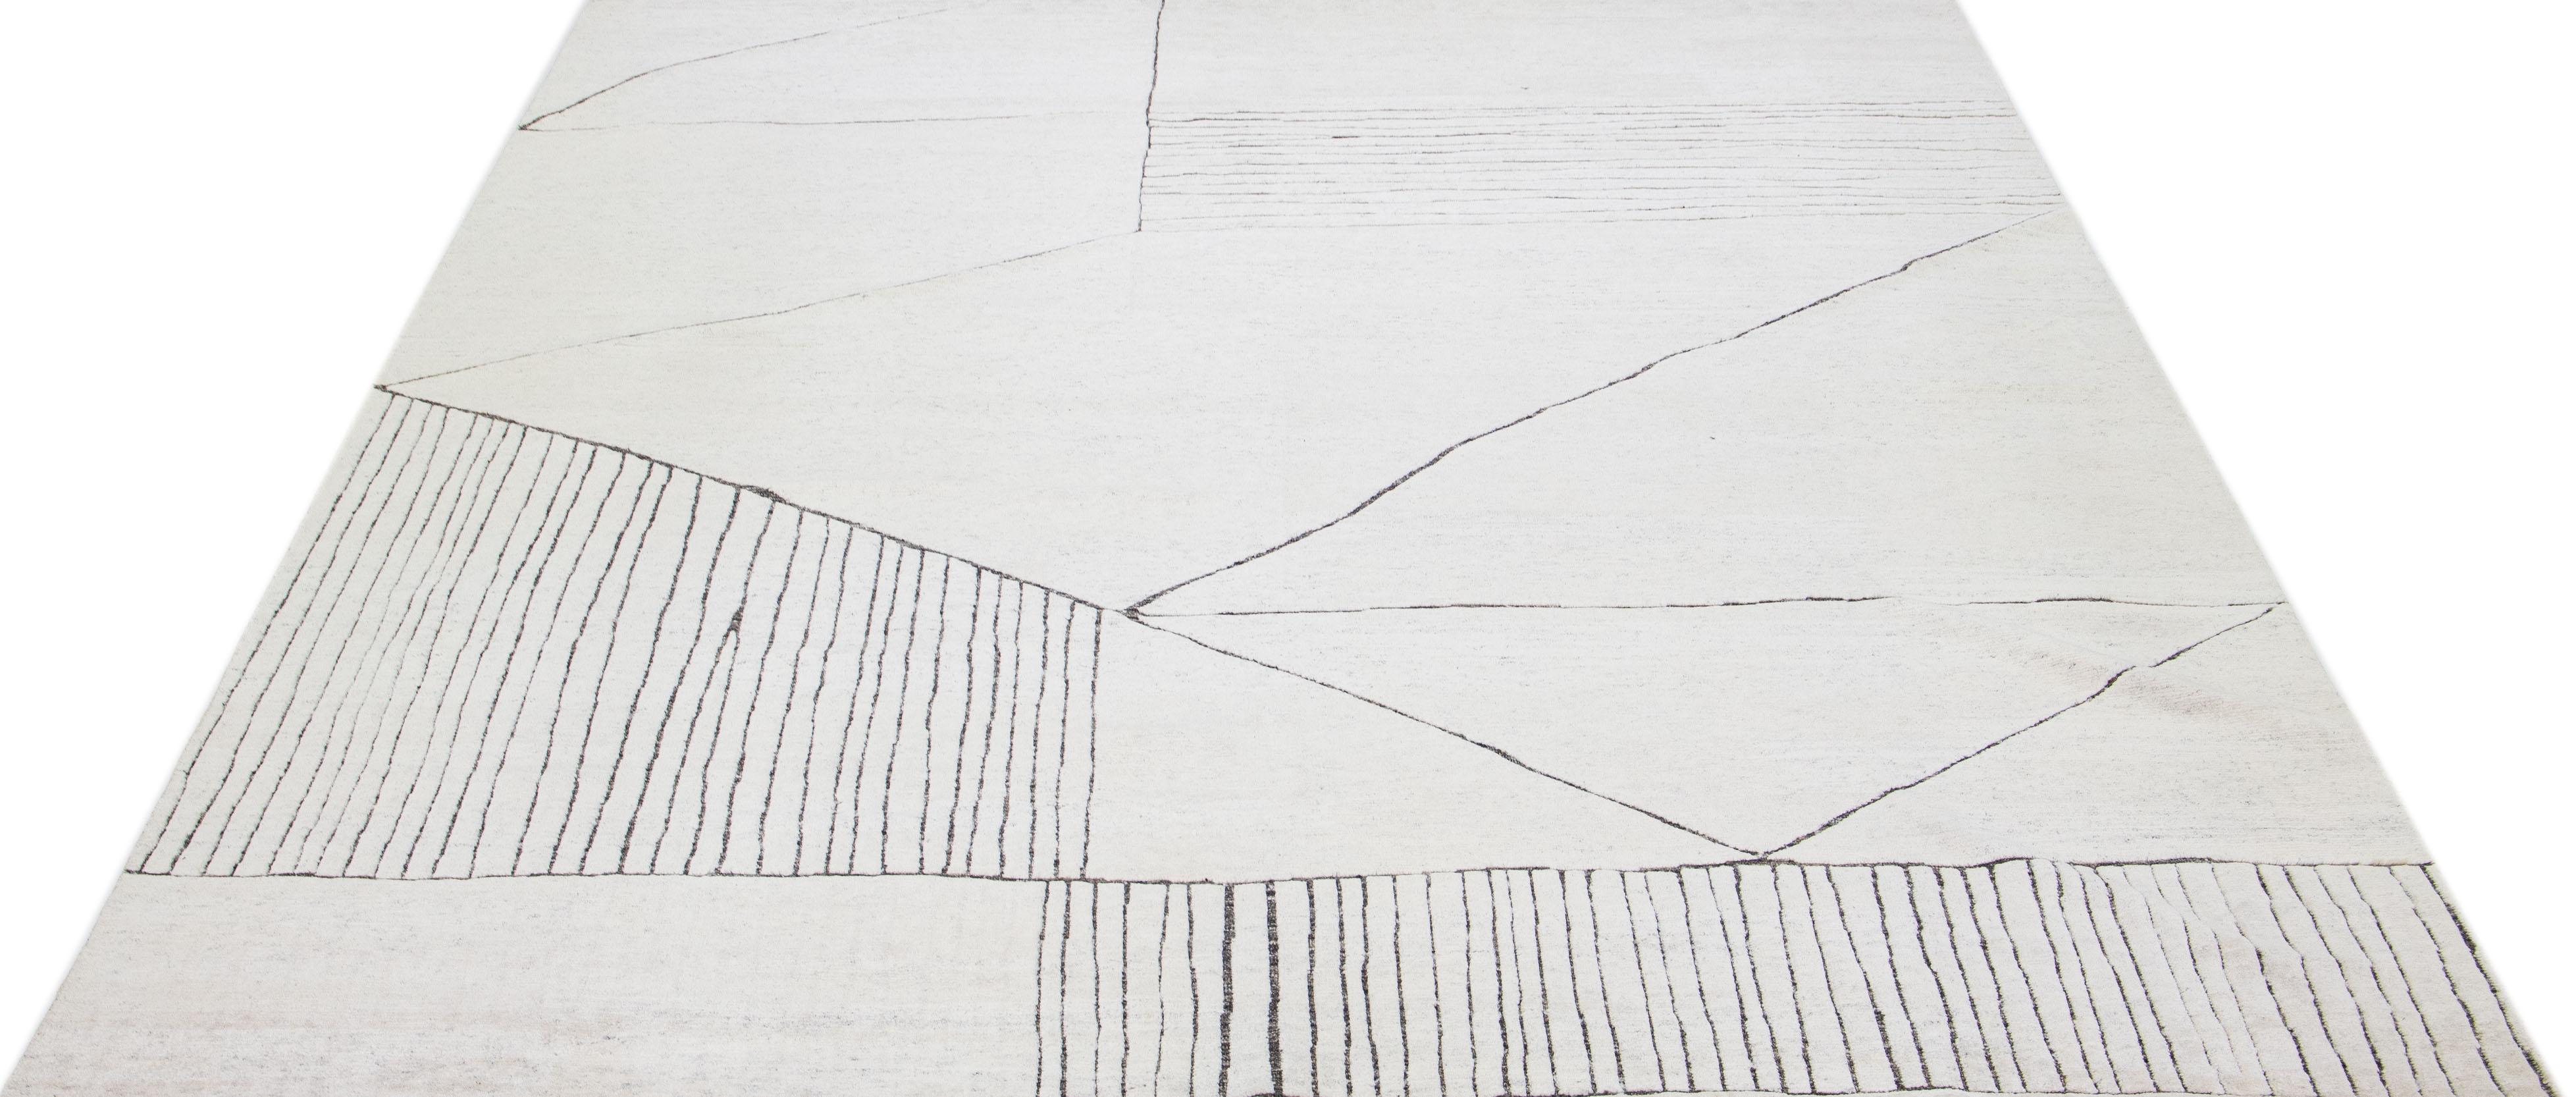 Beautiful modern Moroccan-style hand-knotted wool rug with an ivory color field. This rug is part of our Apadana's Safi collection and features a minimalist design in gray.

This rug measures: 12' x 15'.

Our rugs are professional cleaning